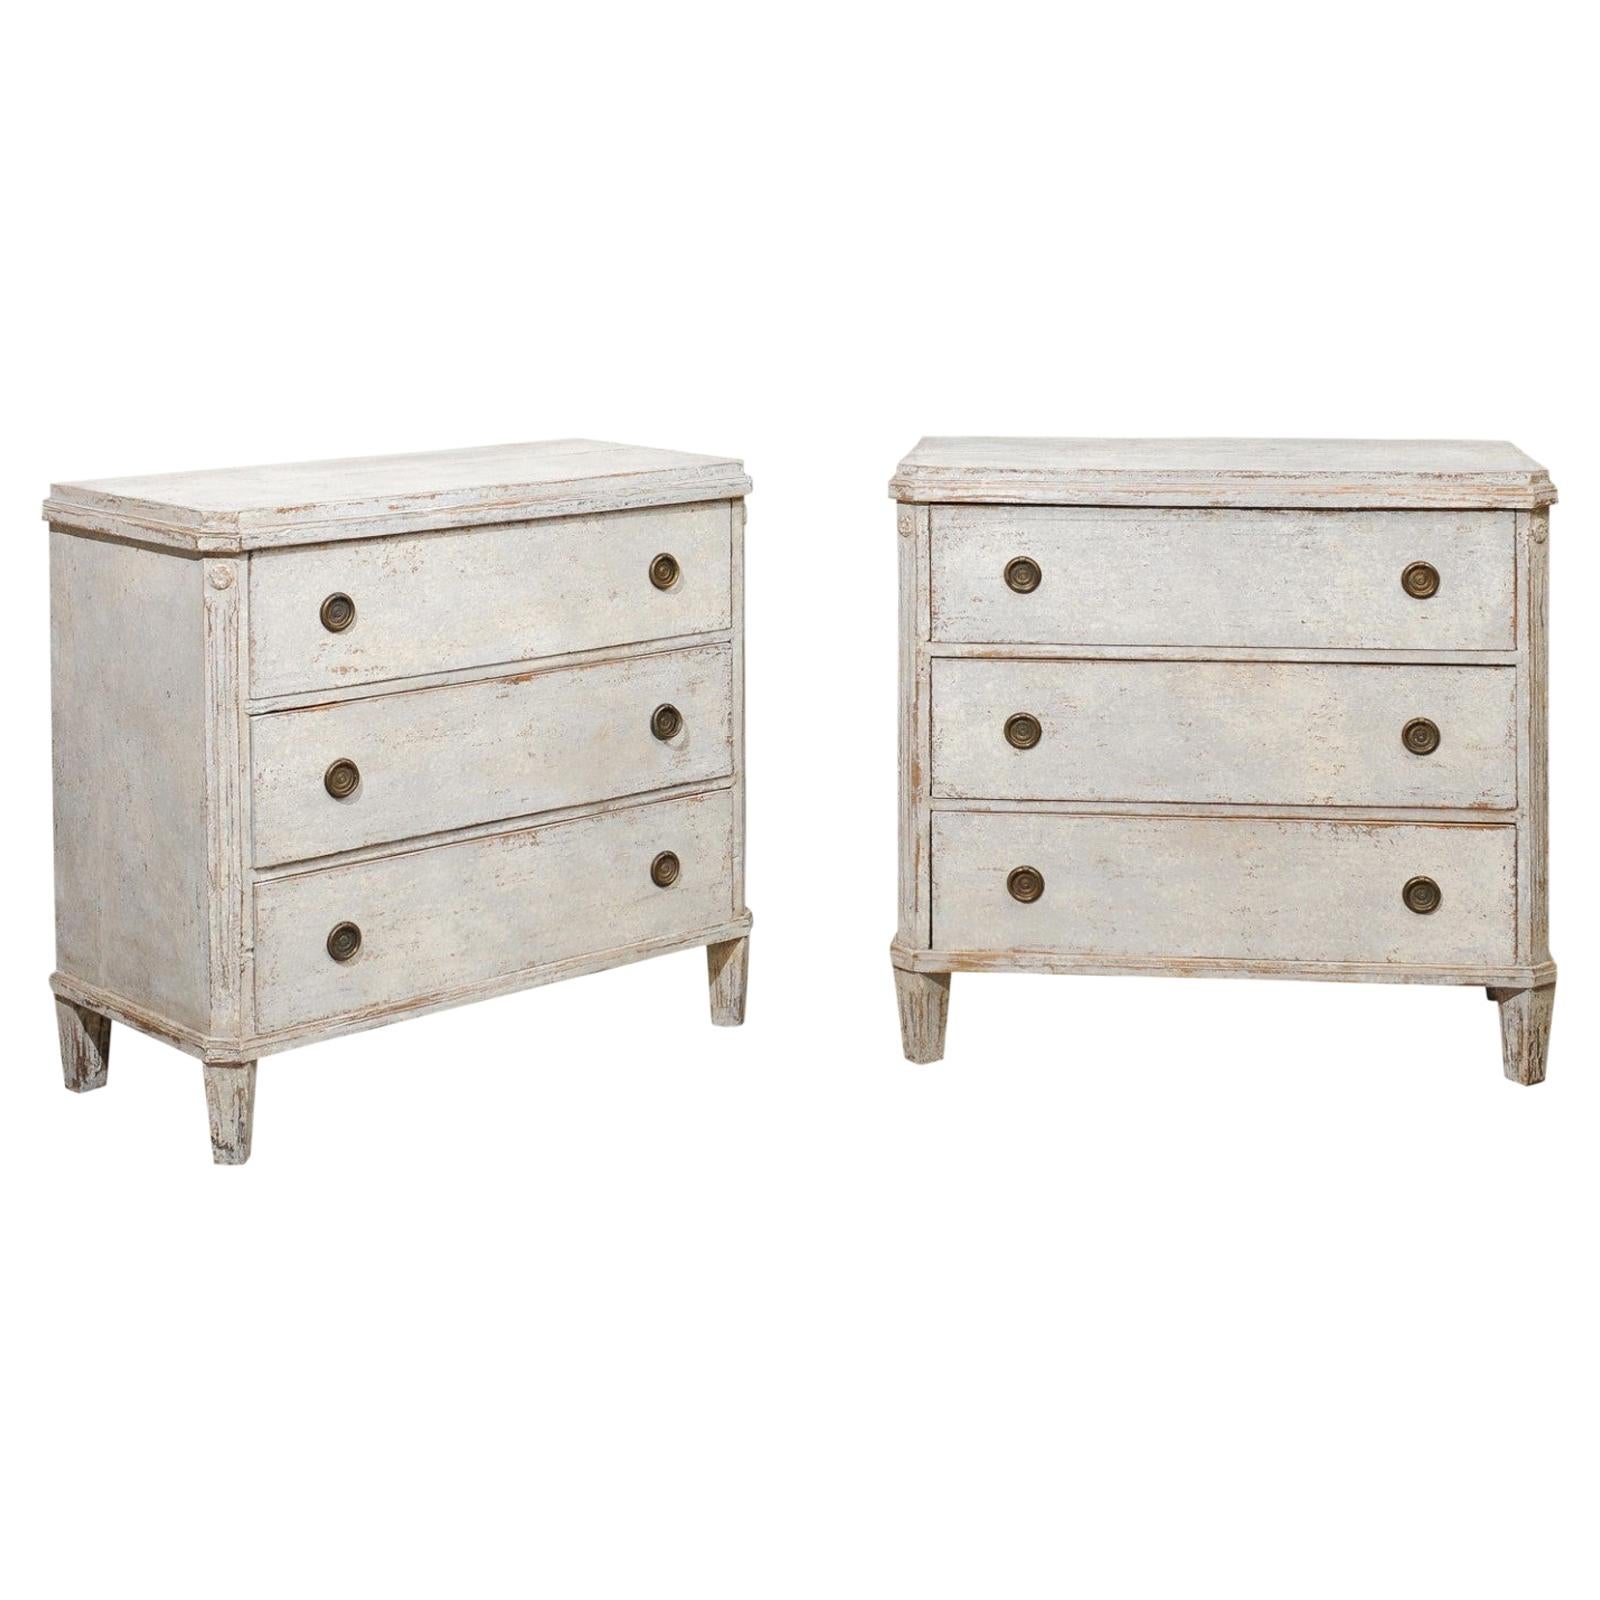 Pair of Swedish Gustavian Style Painted Wood Three-Drawer Chests with Rosettes